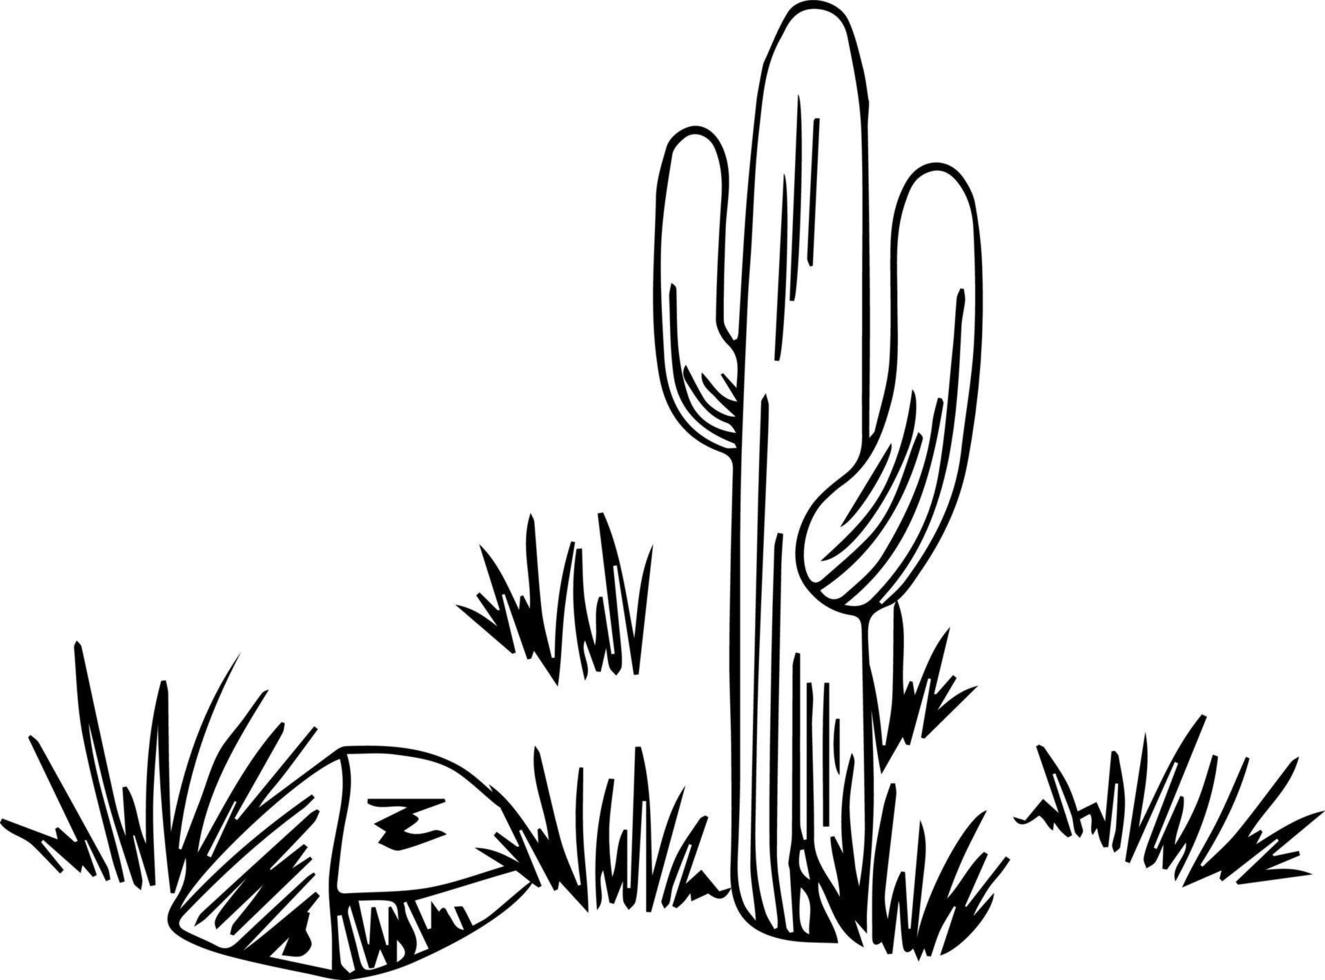 cactus with grass and stone in desert sands vector isolated